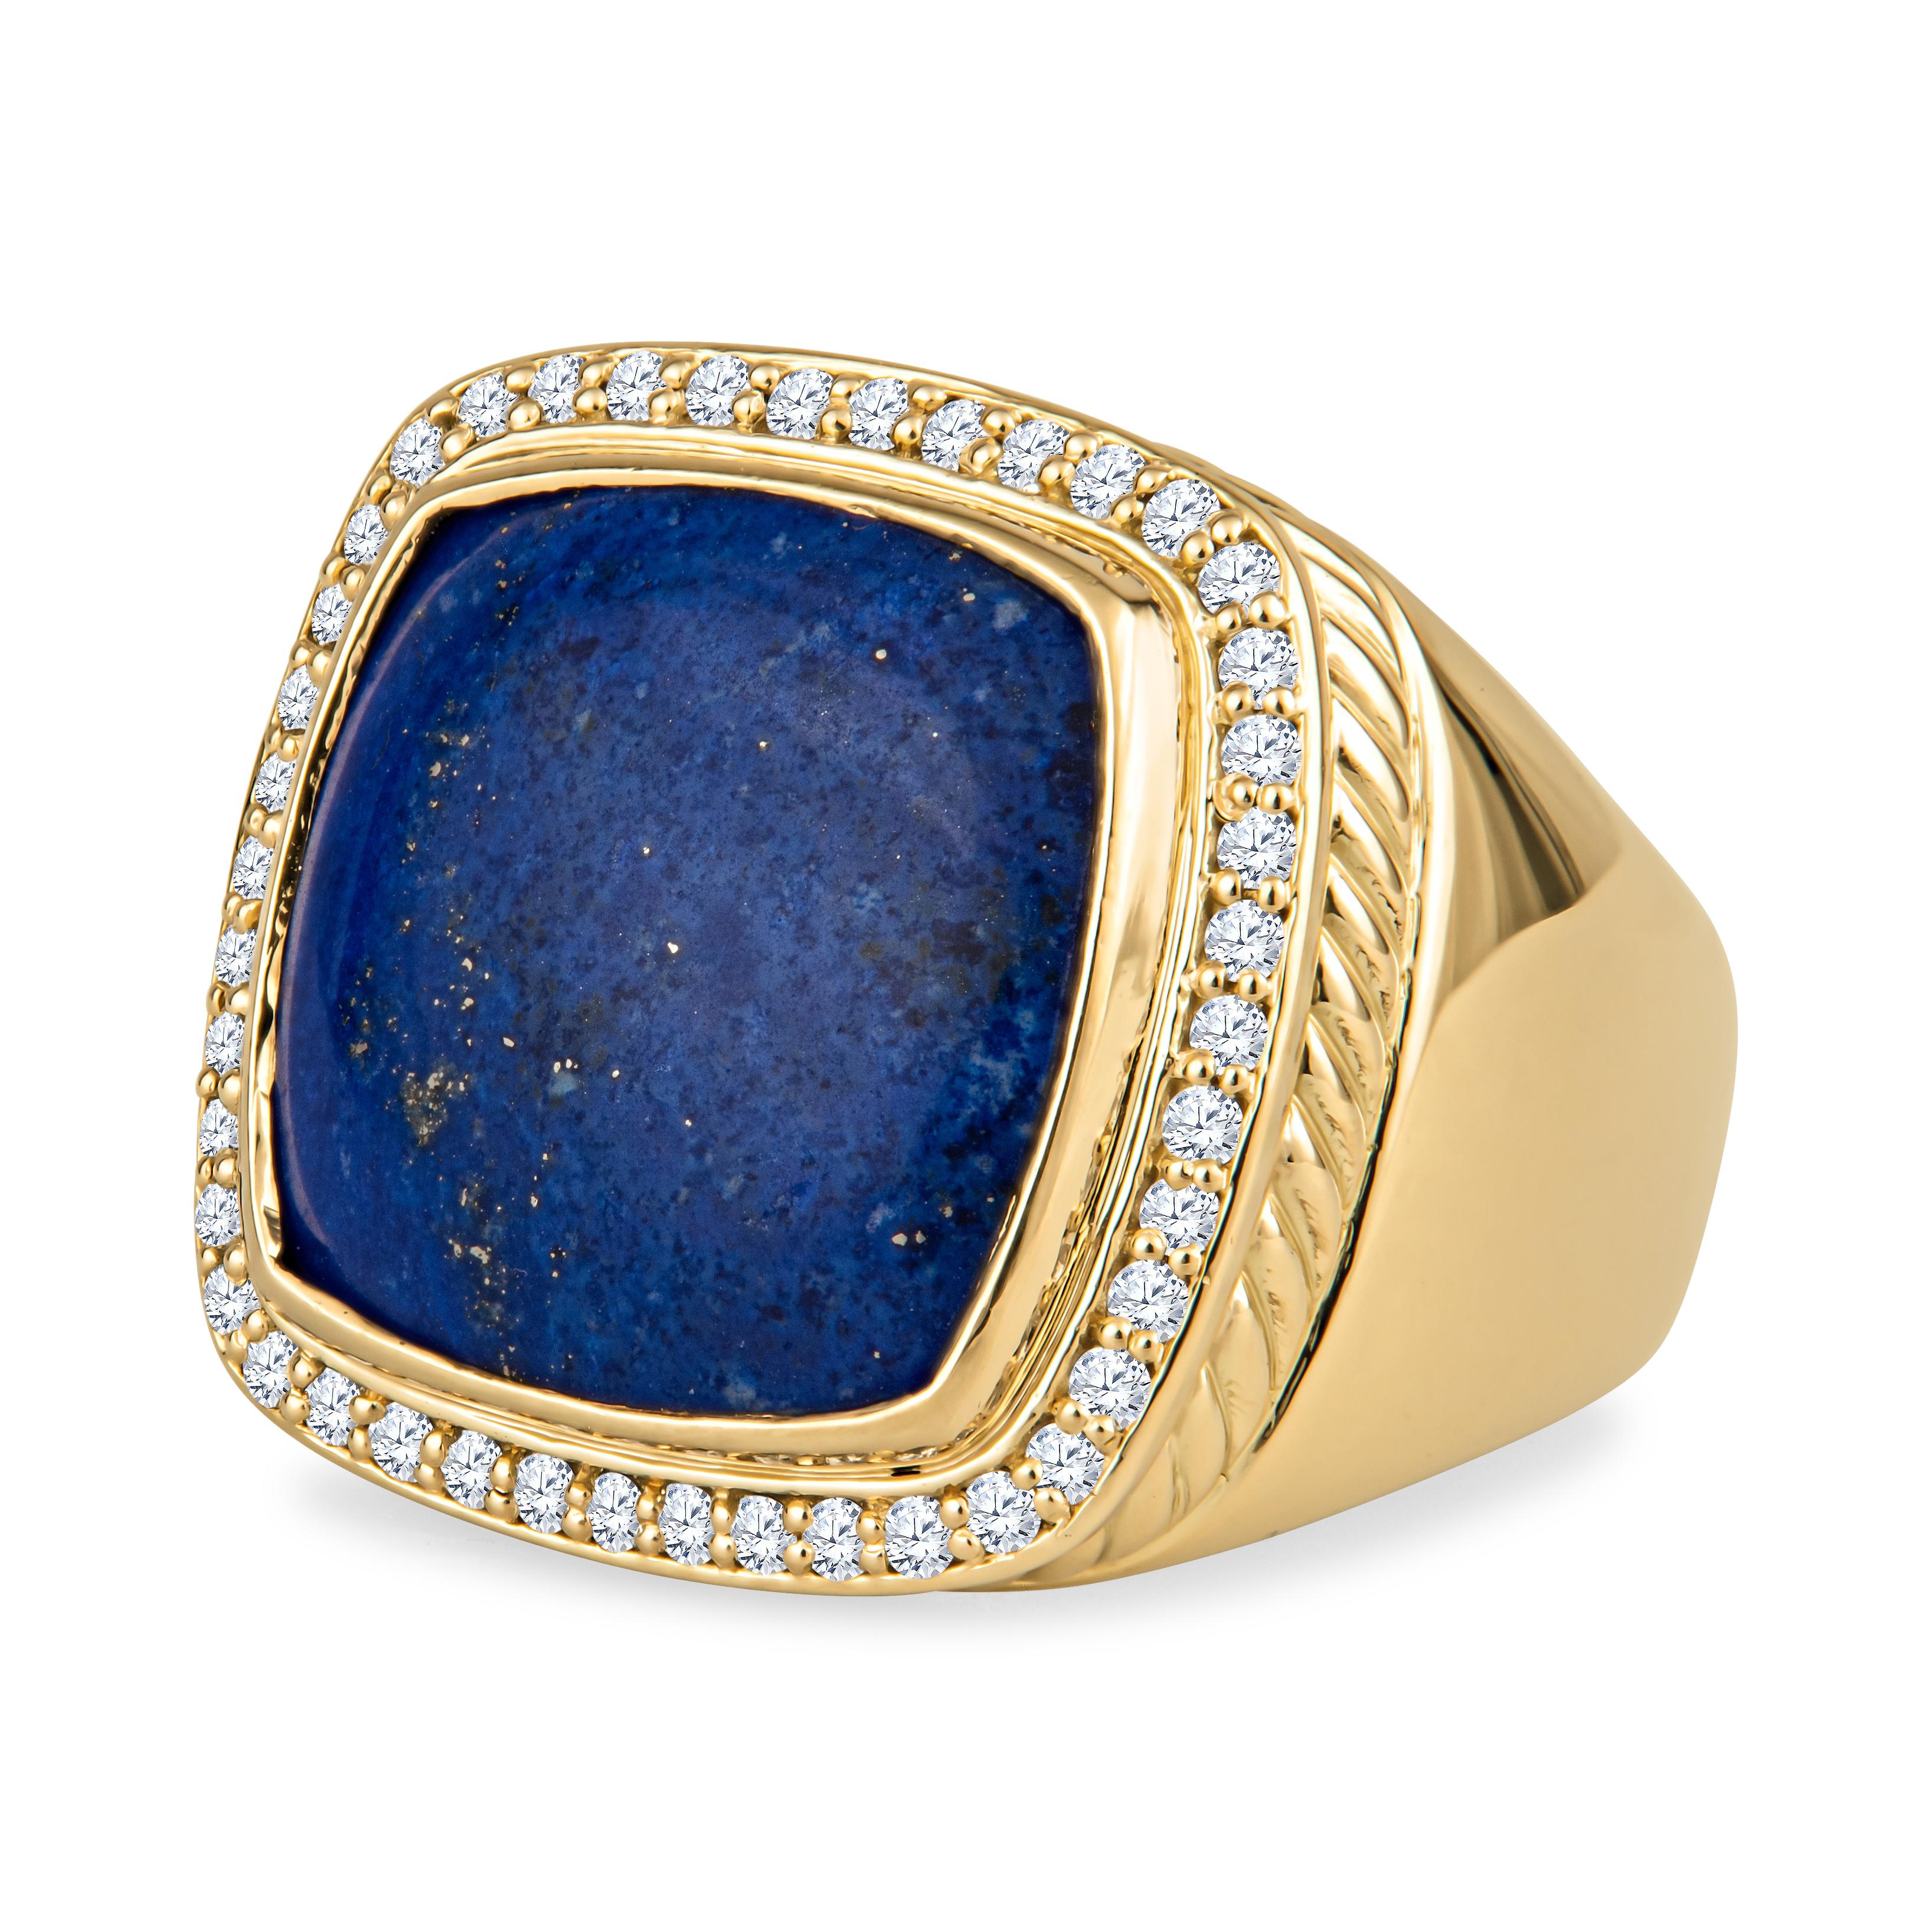 This incredible David Yurman piece features a ~15mm Lapis Lazuli stone, surrounded by 0.43ct total weight in a round brilliant cut diamond halo. These precious stones are encased in an 18kt yellow gold ring, size 5.75, which may be resized to be